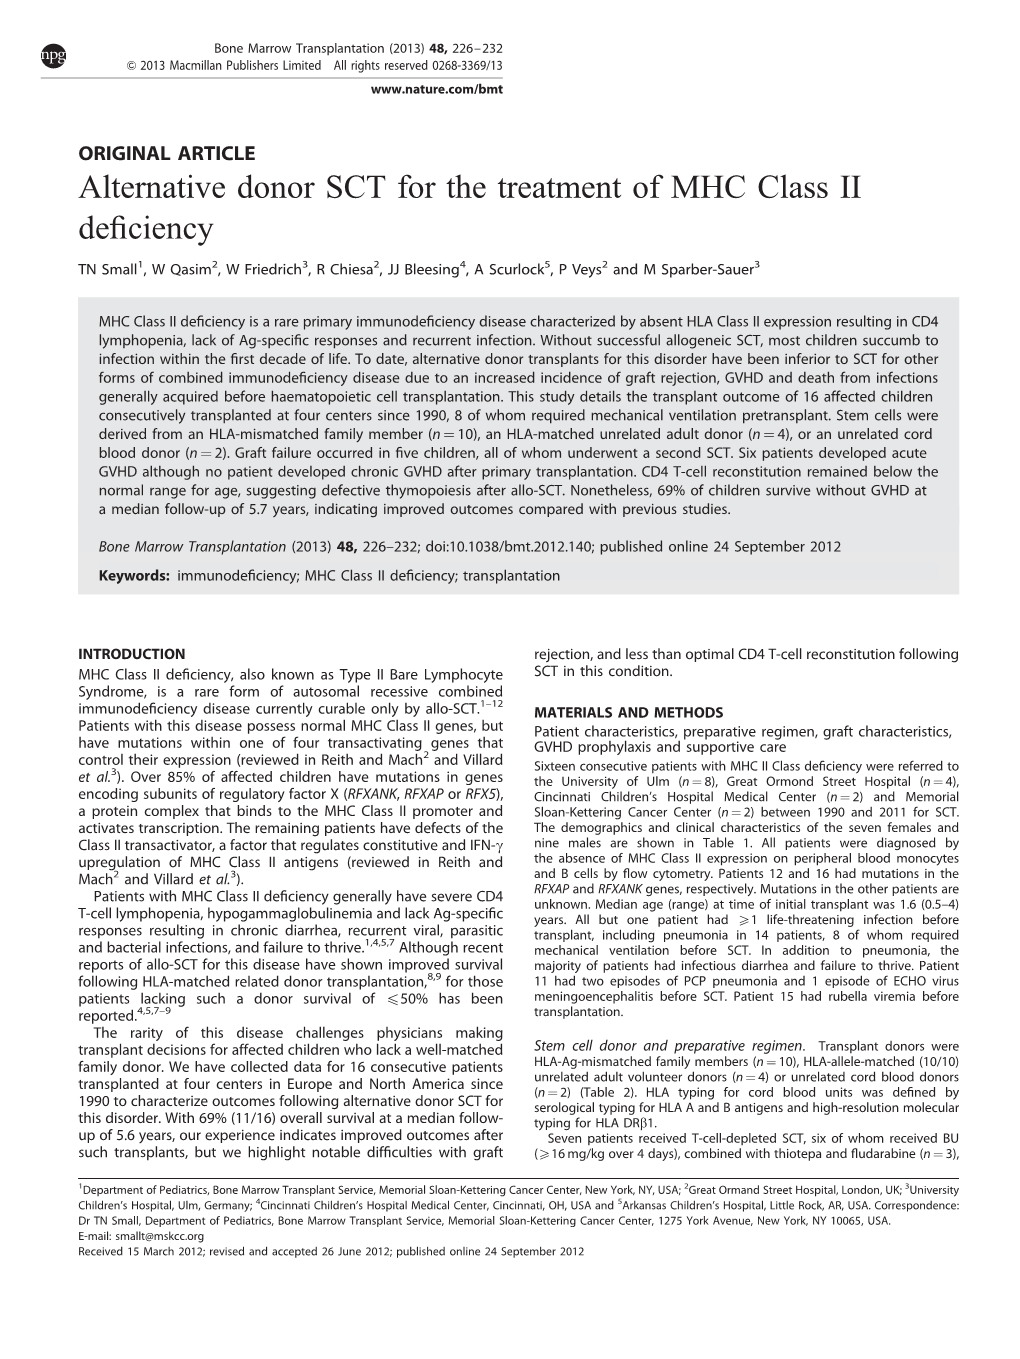 Alternative Donor SCT for the Treatment of MHC Class II Deficiency